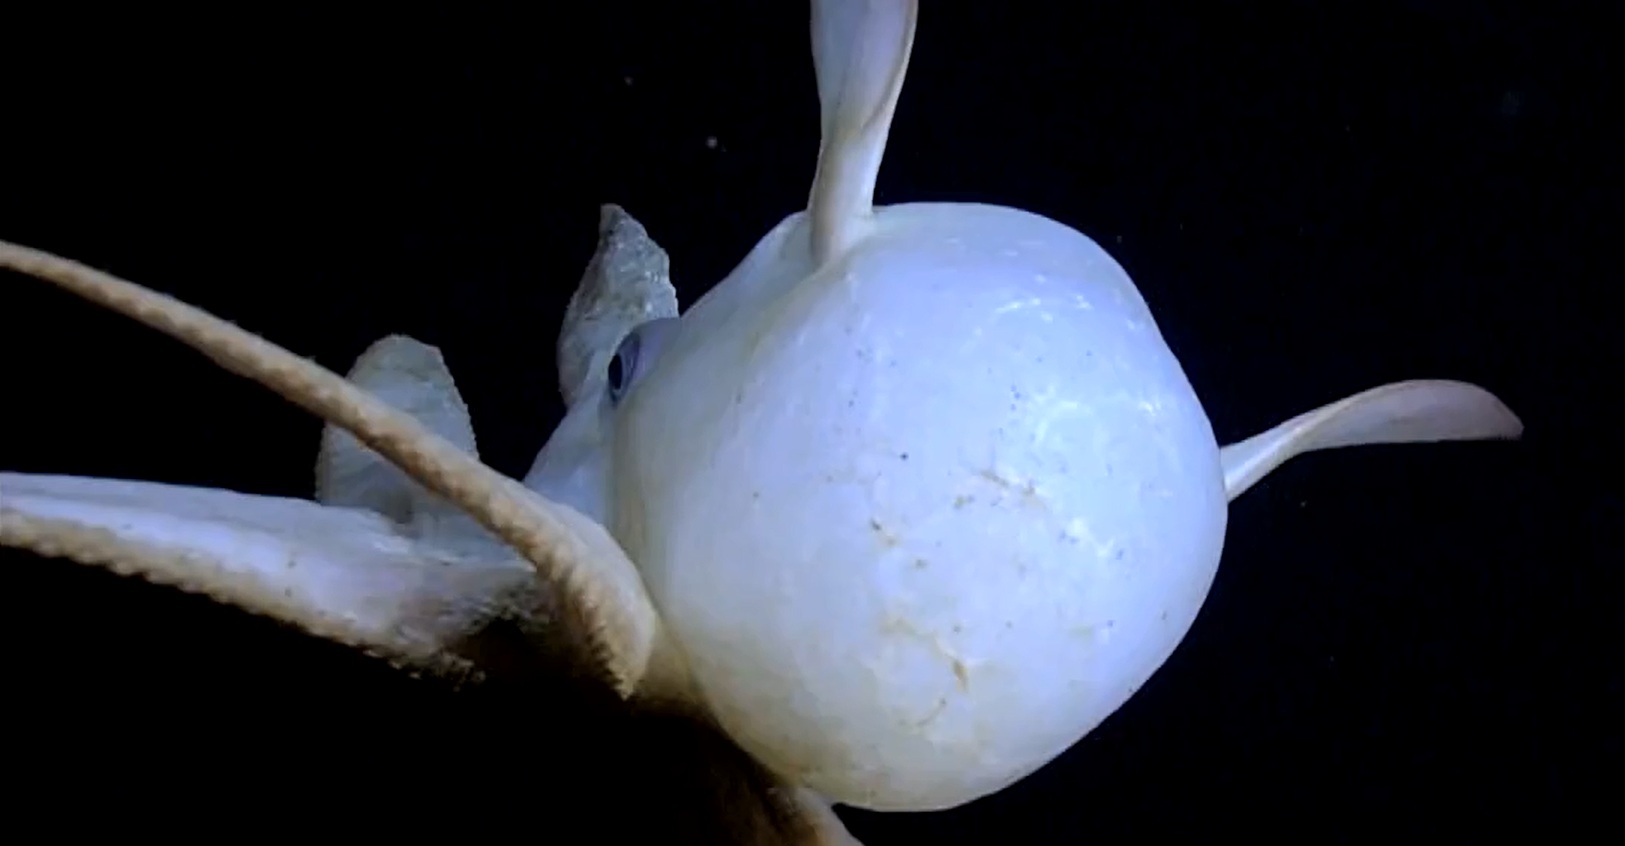 White octopus from above showing head